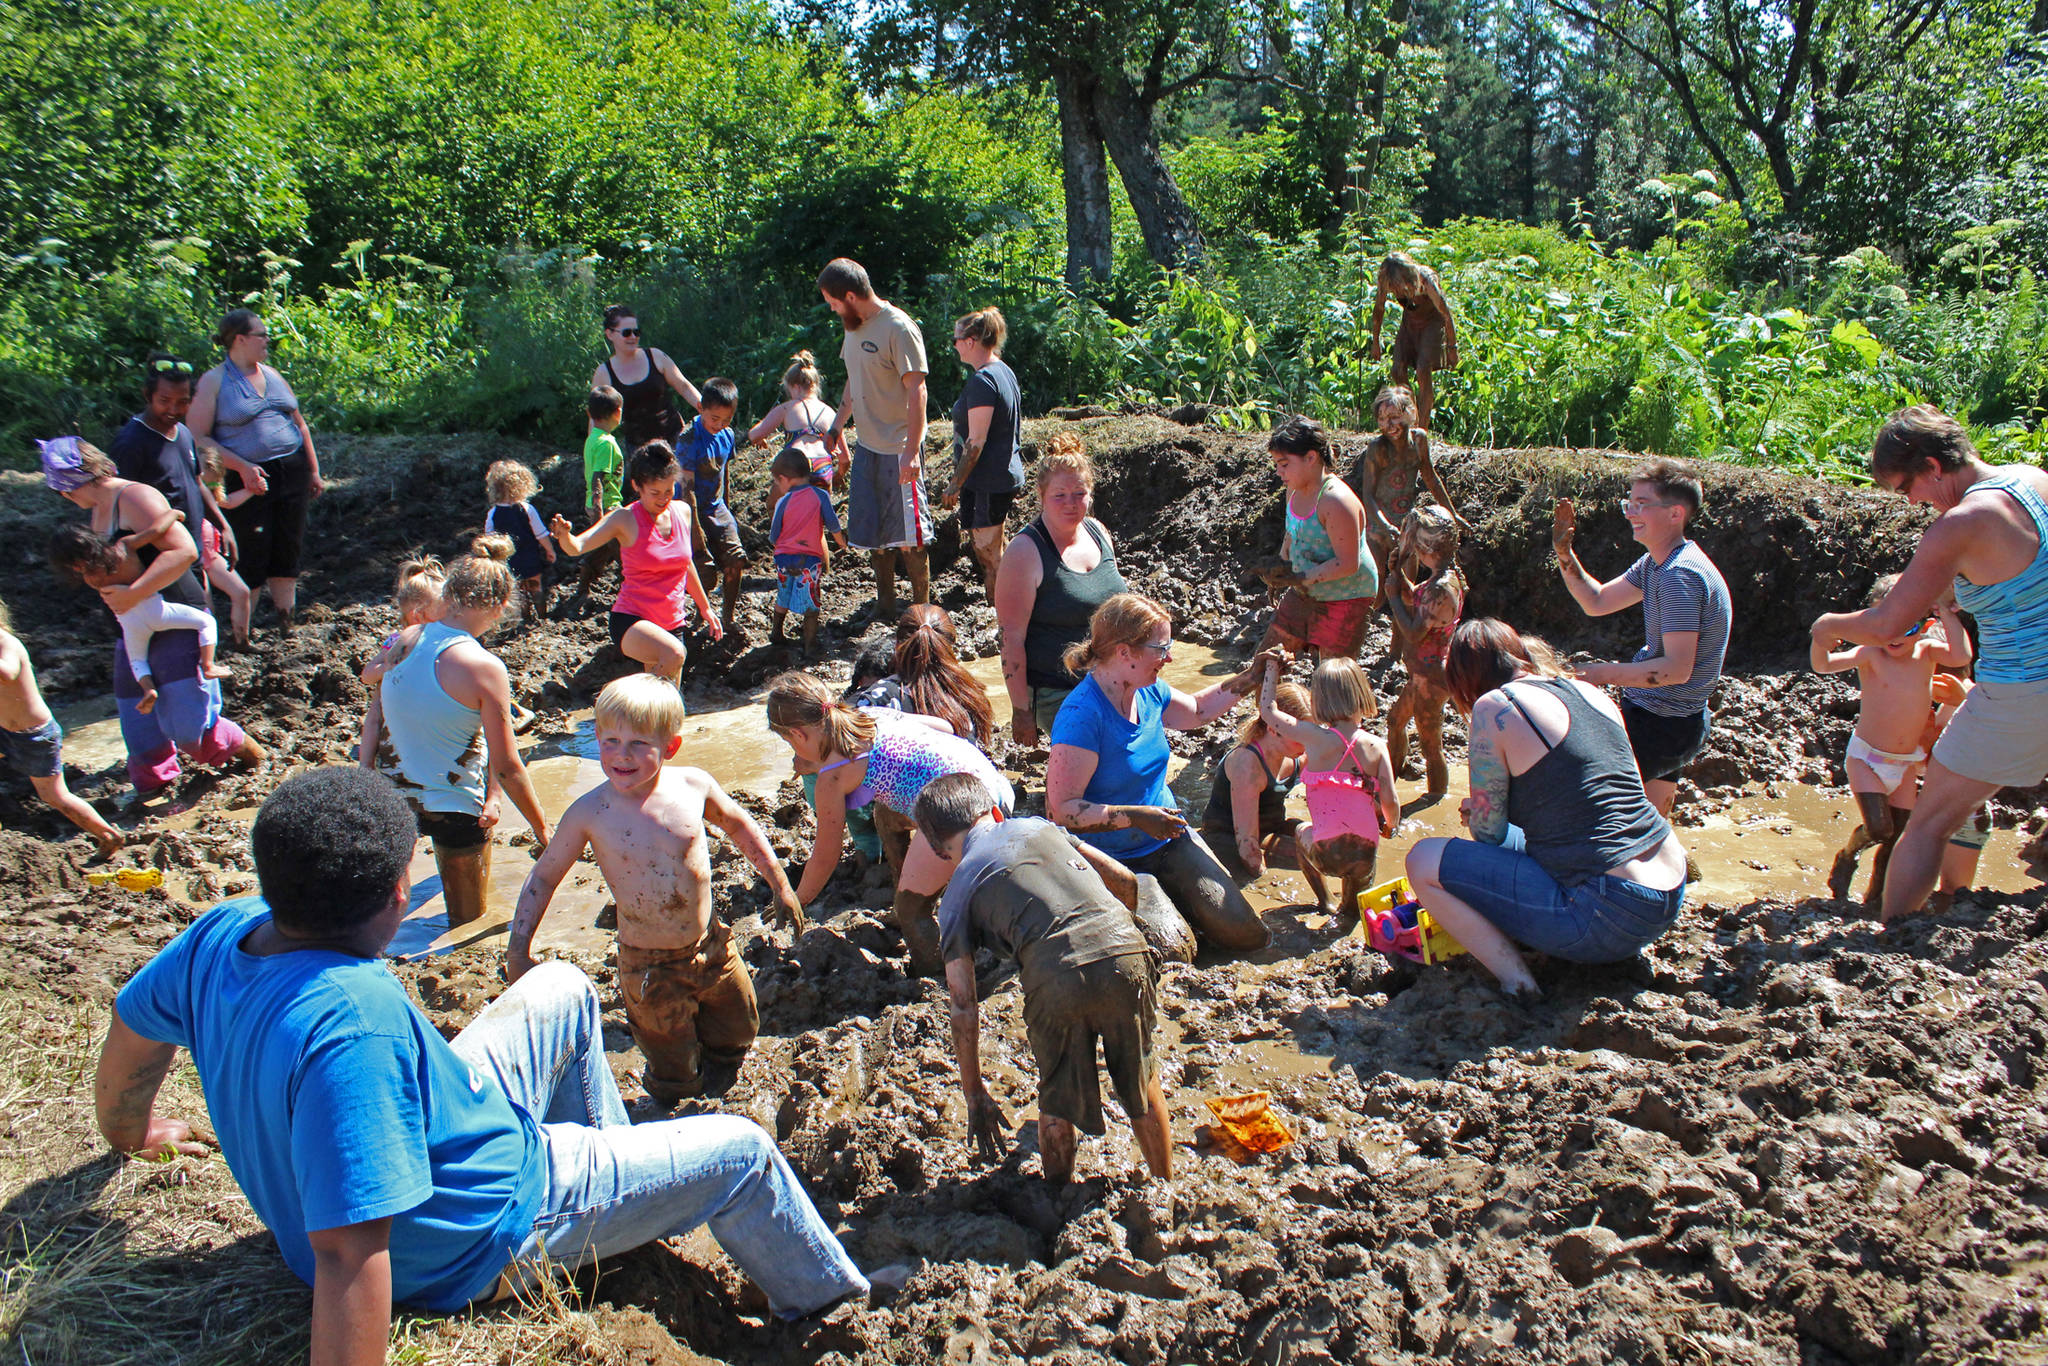 Kids and parents wade through copious amounts of mud in a pit specially prepared for this year’s Mud Wallow on Saturday, July 22, 2017 at Cottonwood Horse Park in Homer, Alaska. (Homer News file photo)